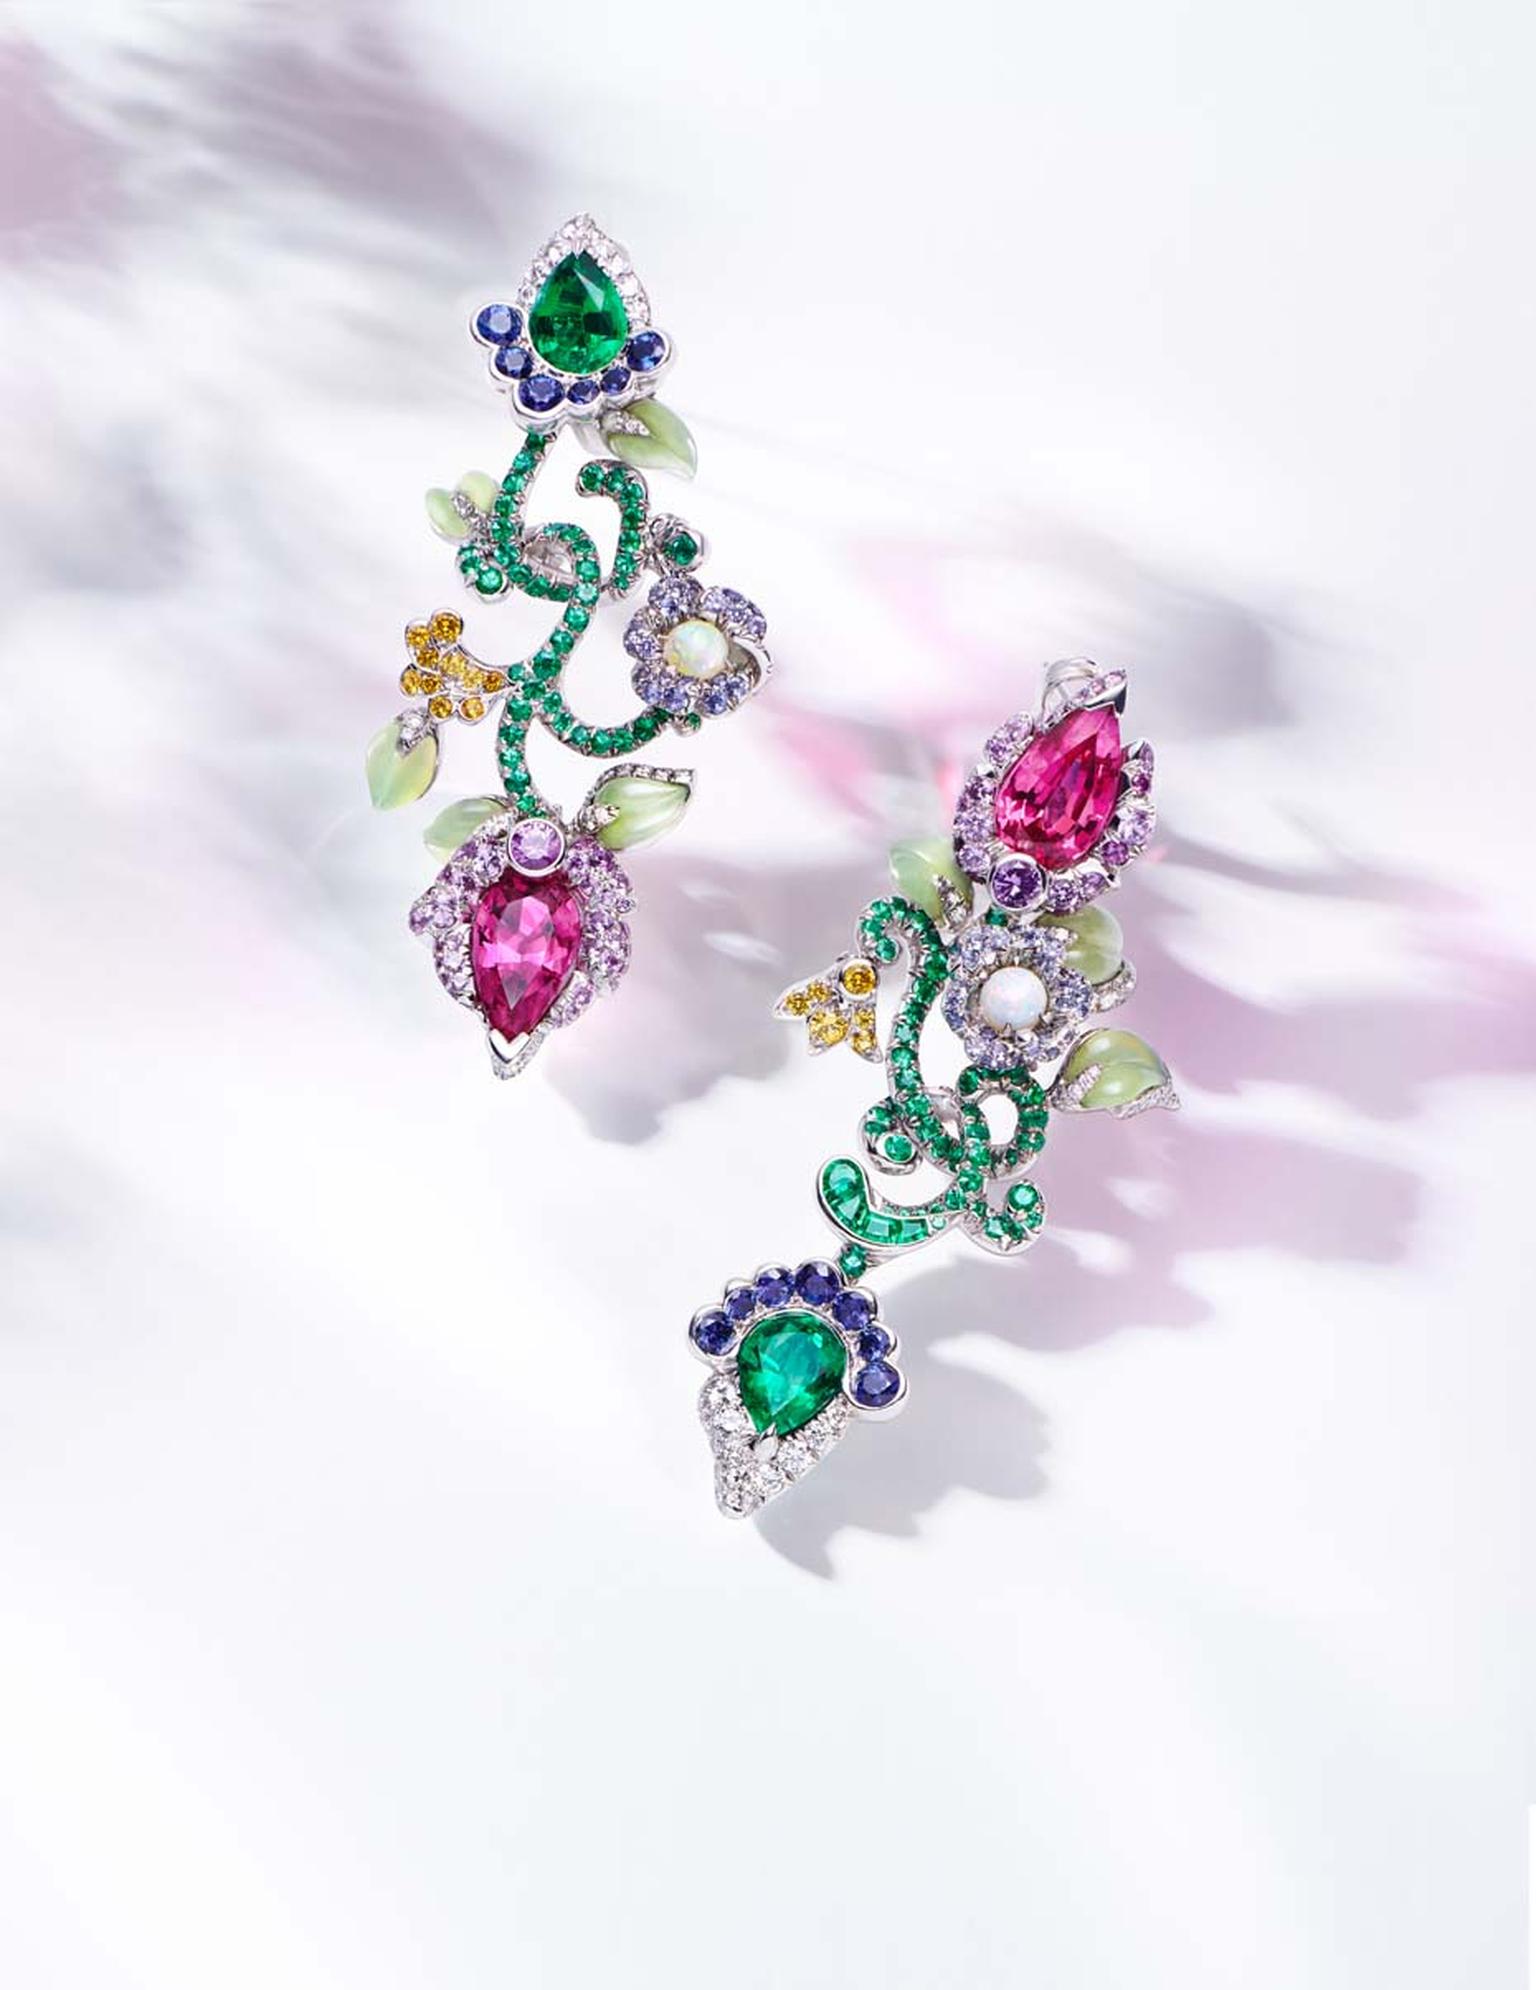 The fresh feel of spring is perfectly captured in these Fabergé earrings from the new Secret Garden high jewelry collection.